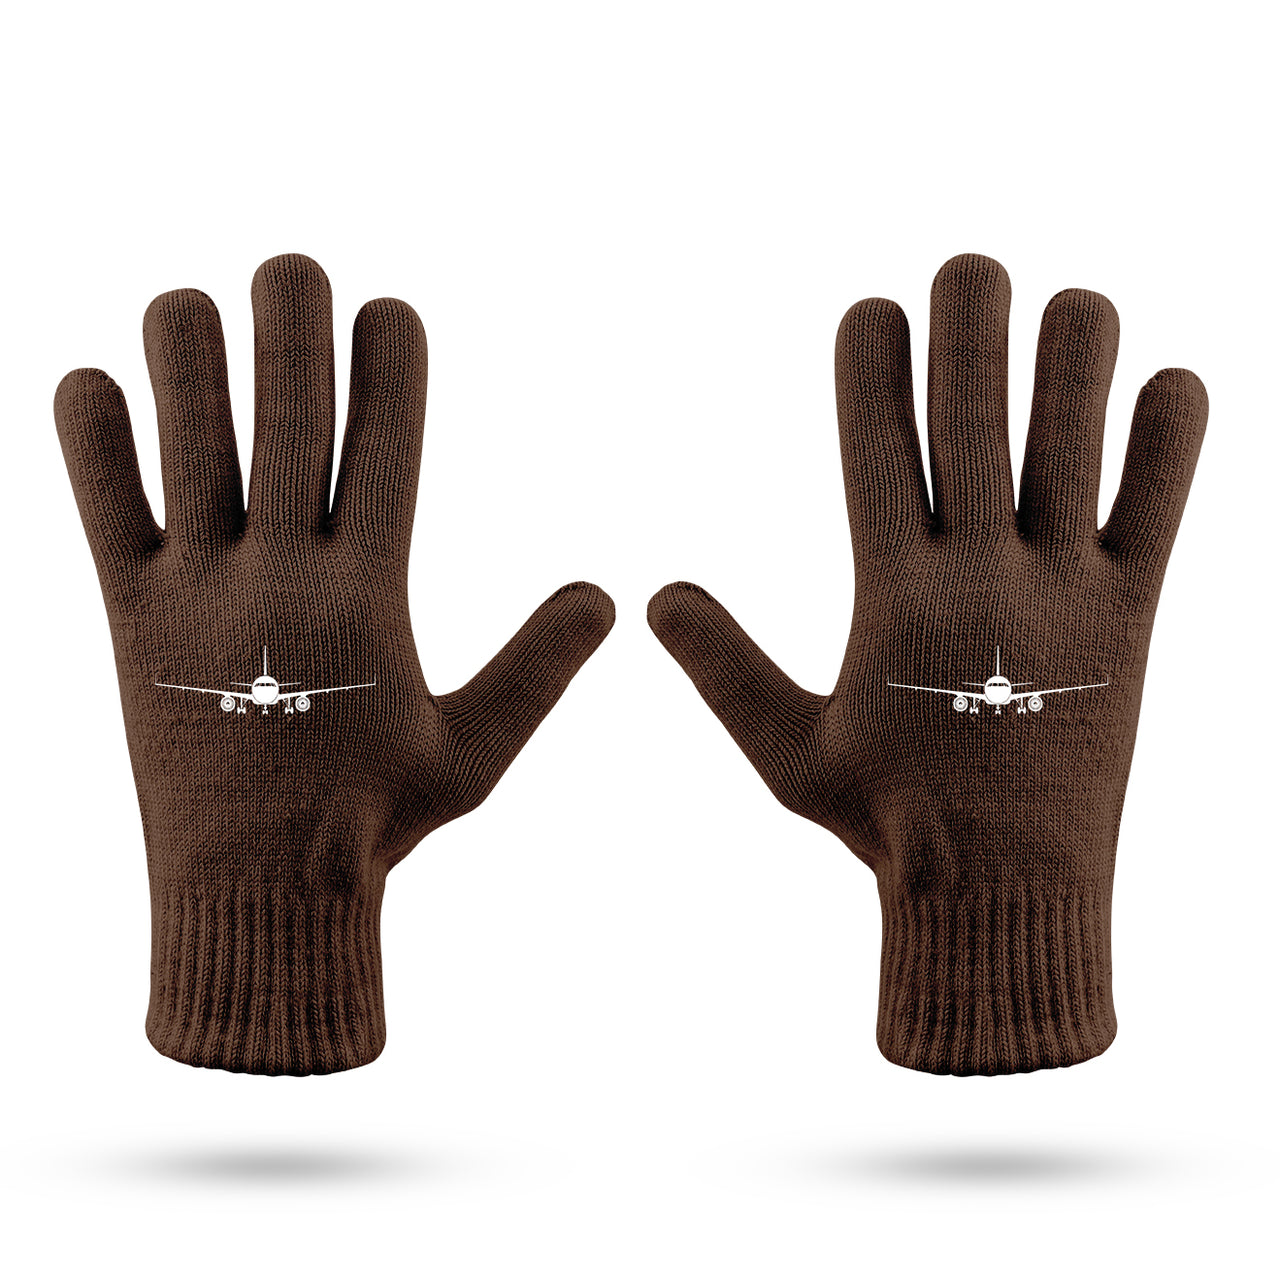 Airbus A320 Silhouette Designed Gloves